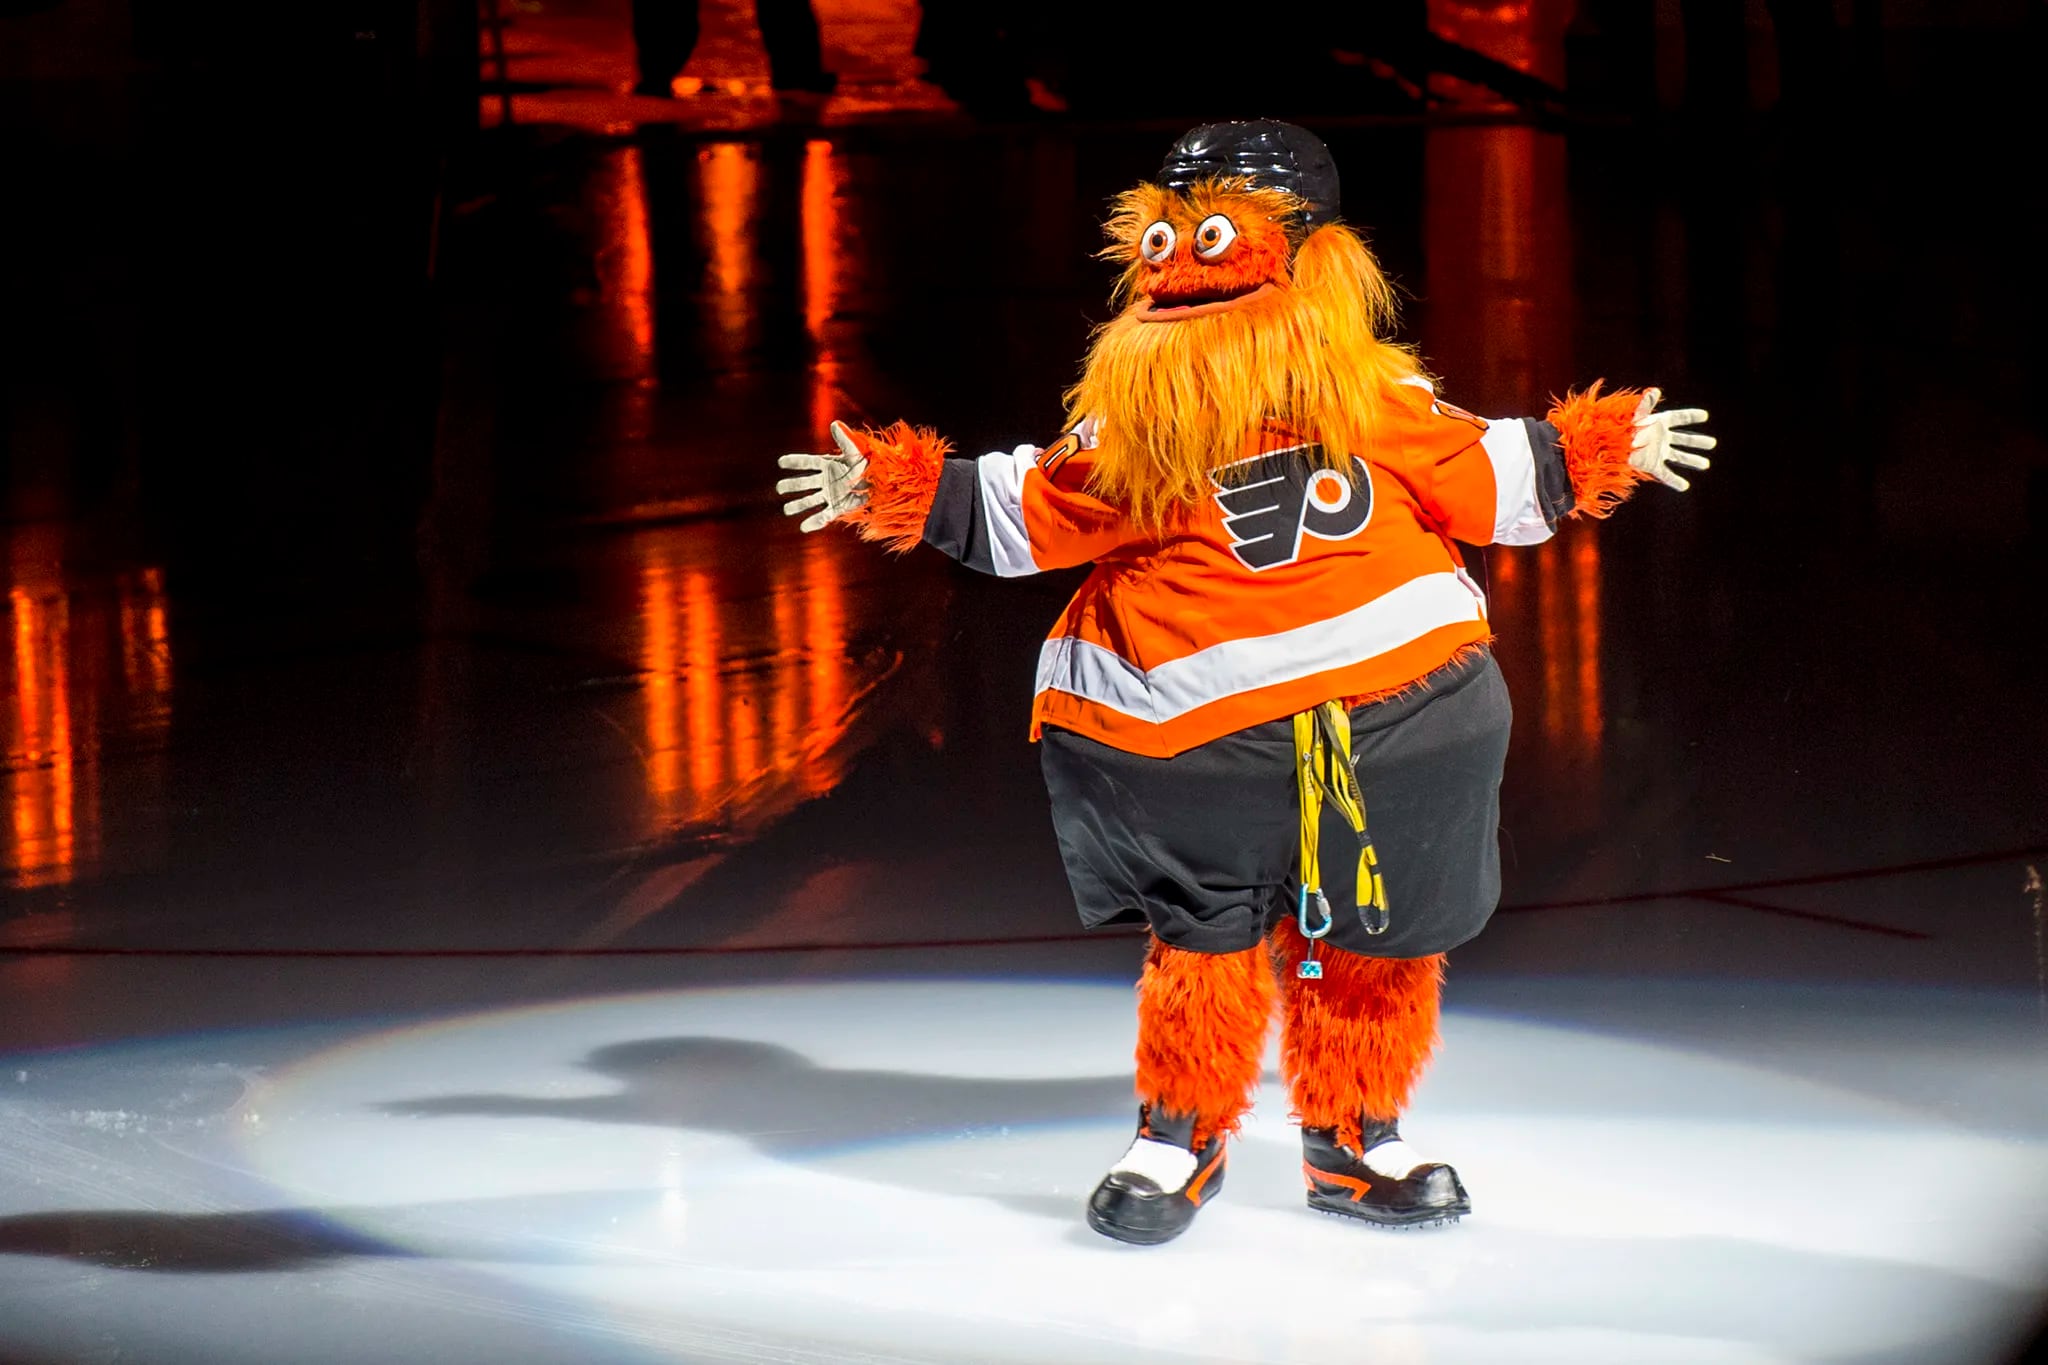 For better or for worse, the Phanatic helped introduce Gritty to